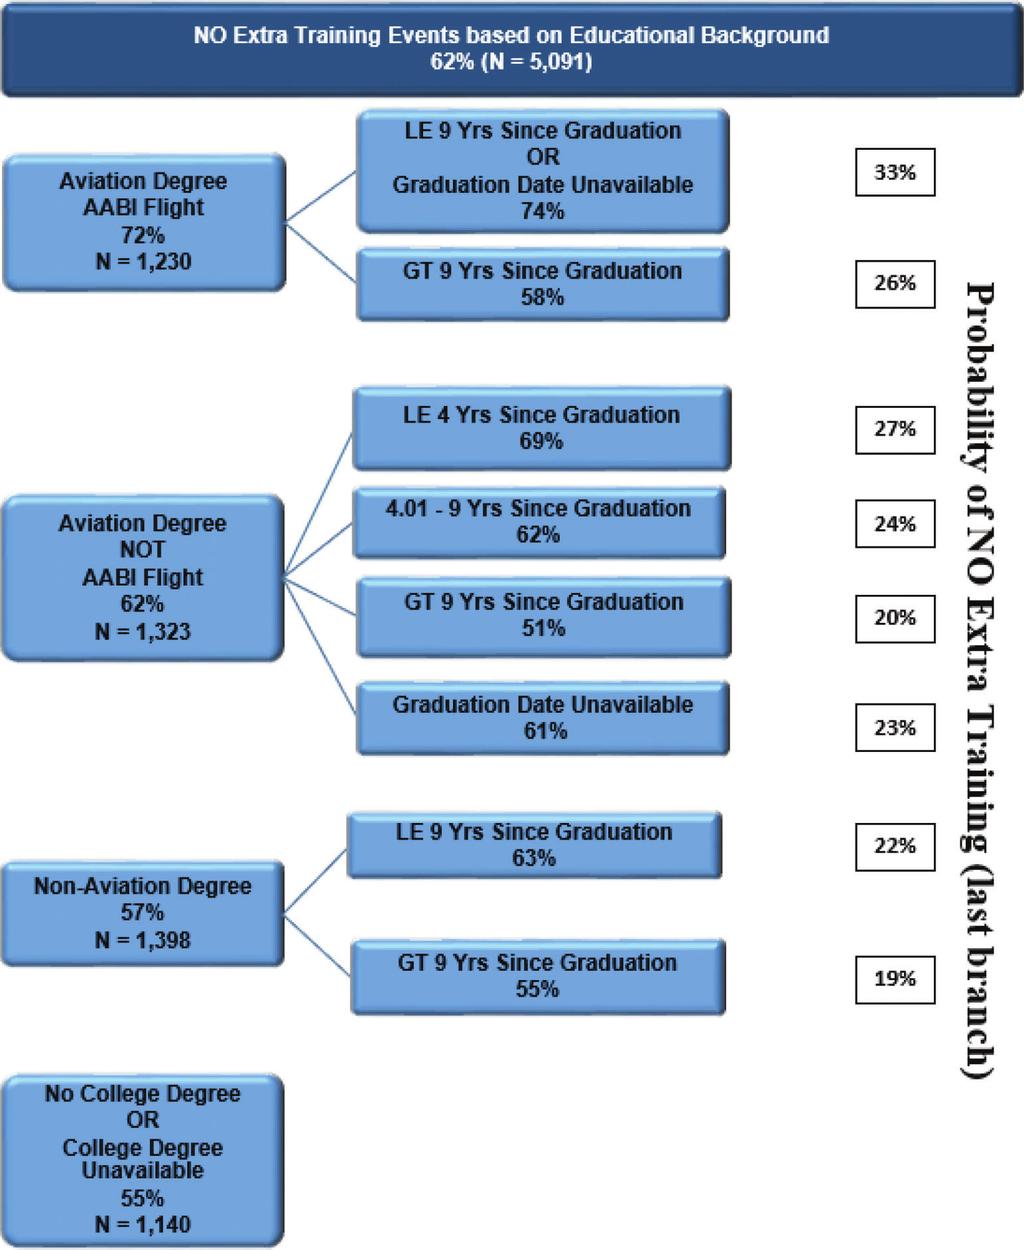 82 G. Smith et al. / Journal of Aviation Technology and Engineering Figure 5. Tree diagram of Extra Training Events based on Educational Background variables.